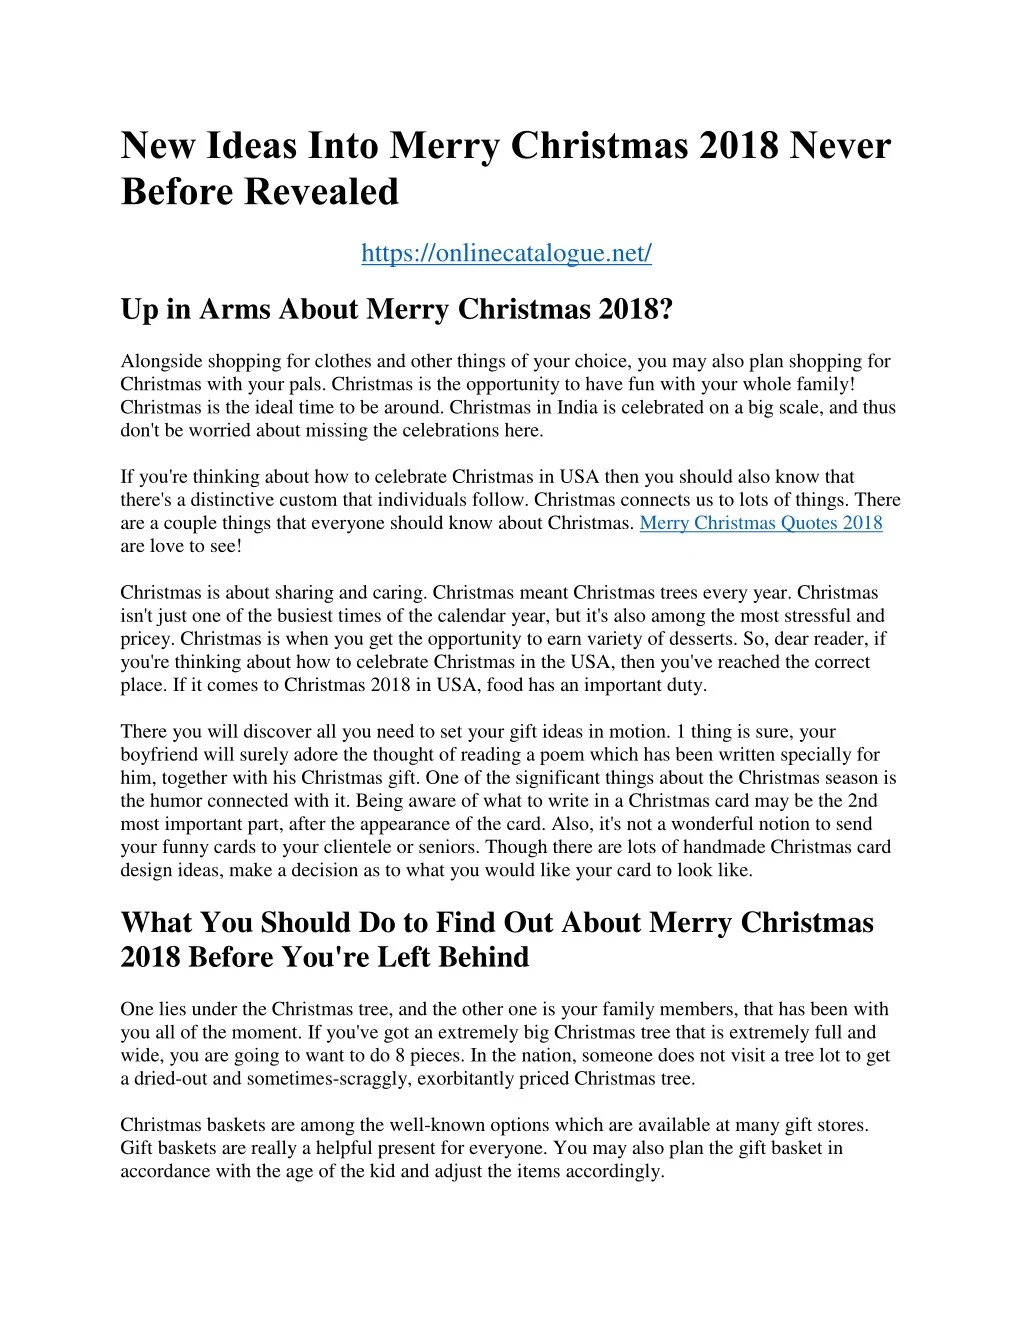 new ideas into merry christmas 2018 never before